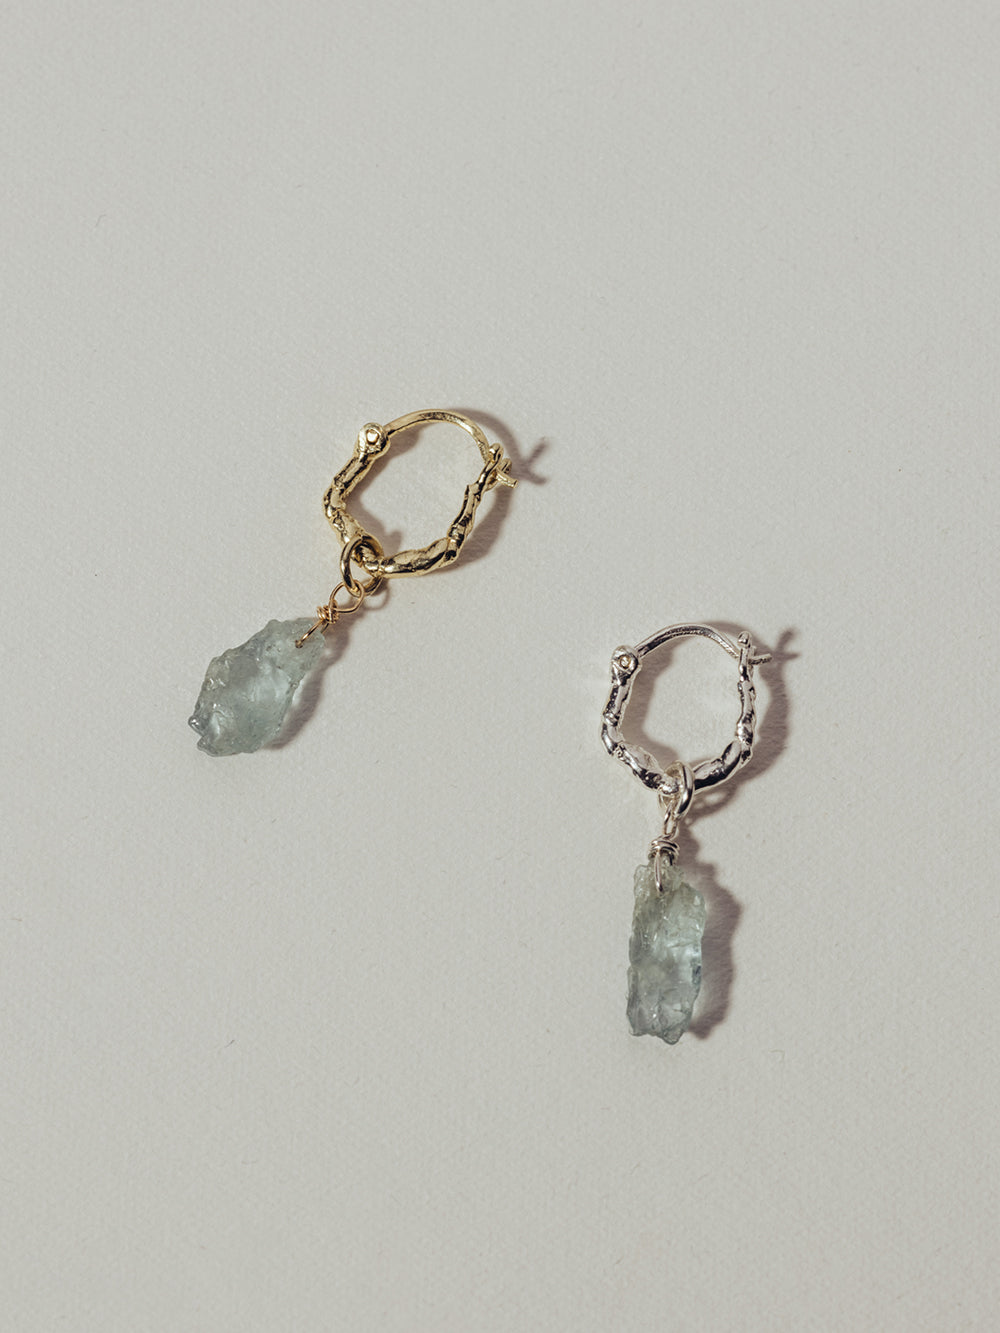 Sunny soldier - Aquamarine | 925 Sterling Silver